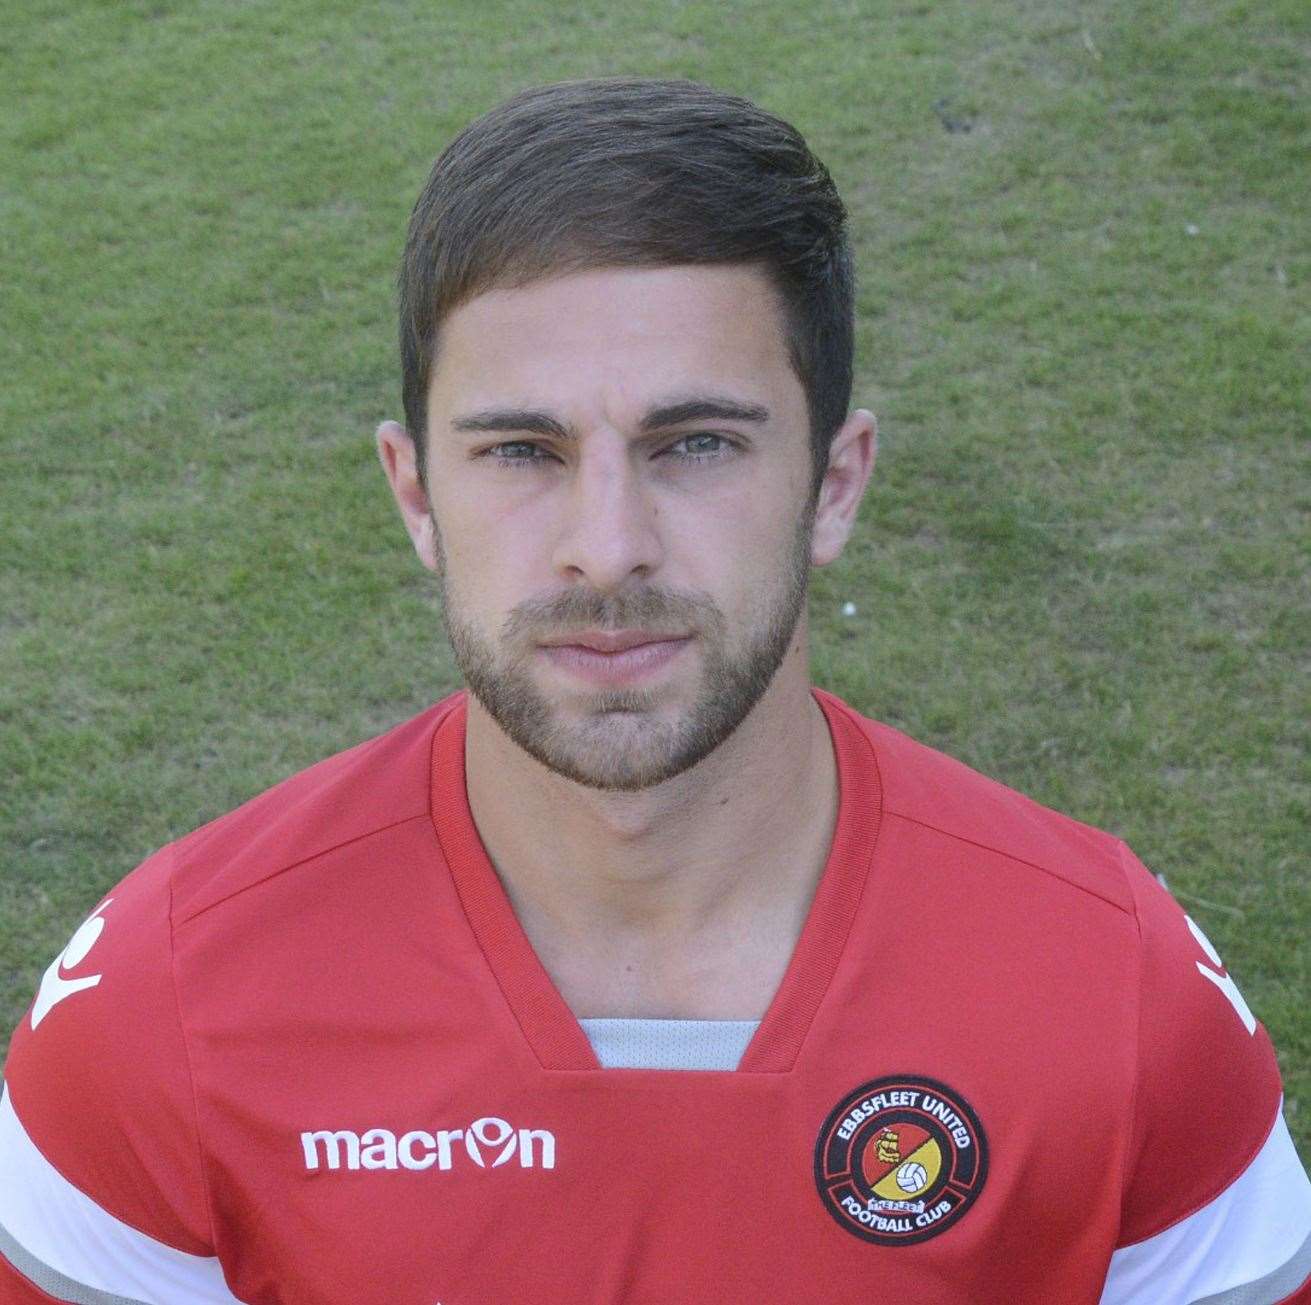 Ebbsfleet midfielder Michael West has joined promotion-chasing Herne Bay on loan for the remainder of the season